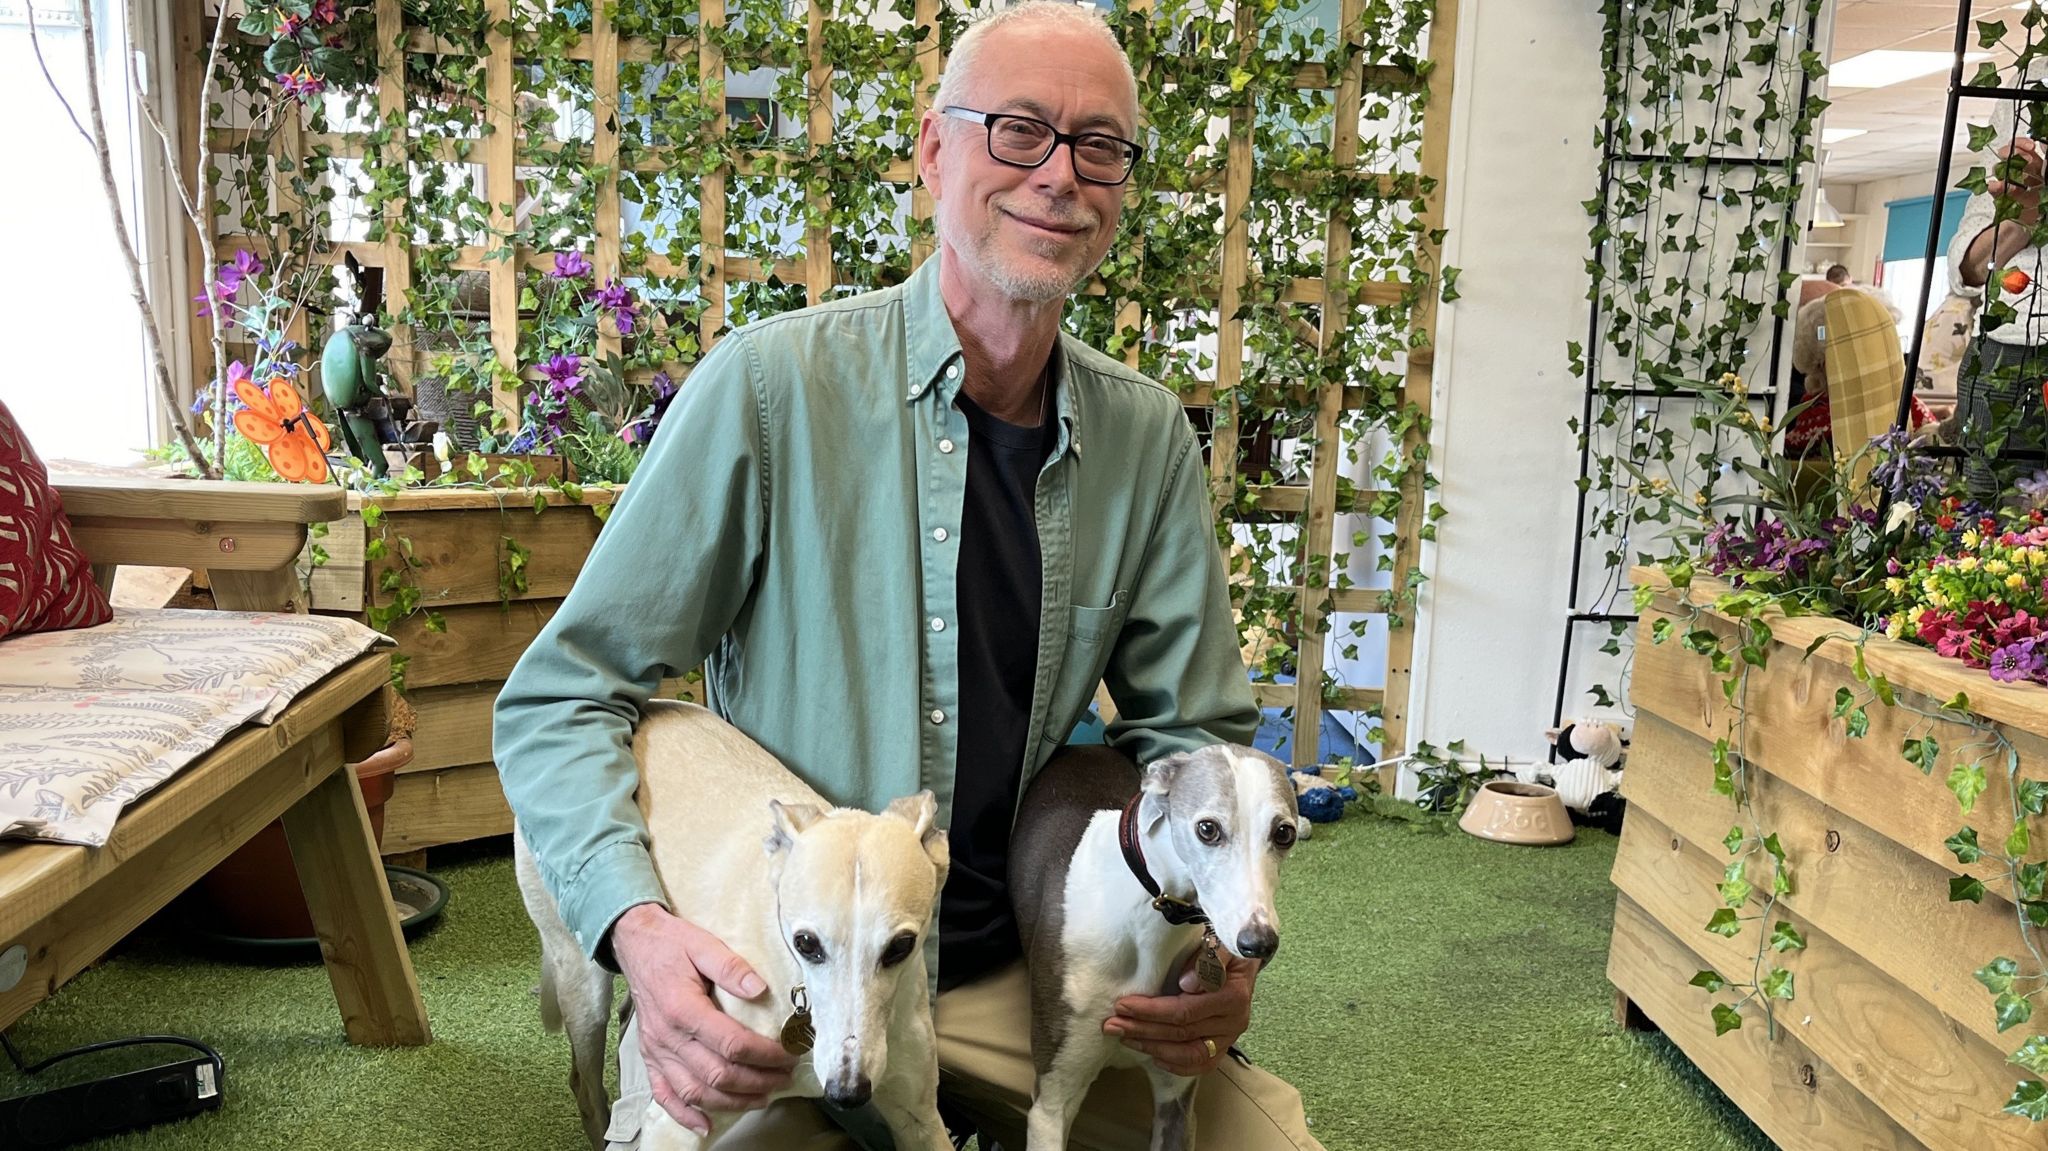 Grant Newton with his dogs - tan whippet Higby and grey and white whippet Dottie who roam free as therapy dogs